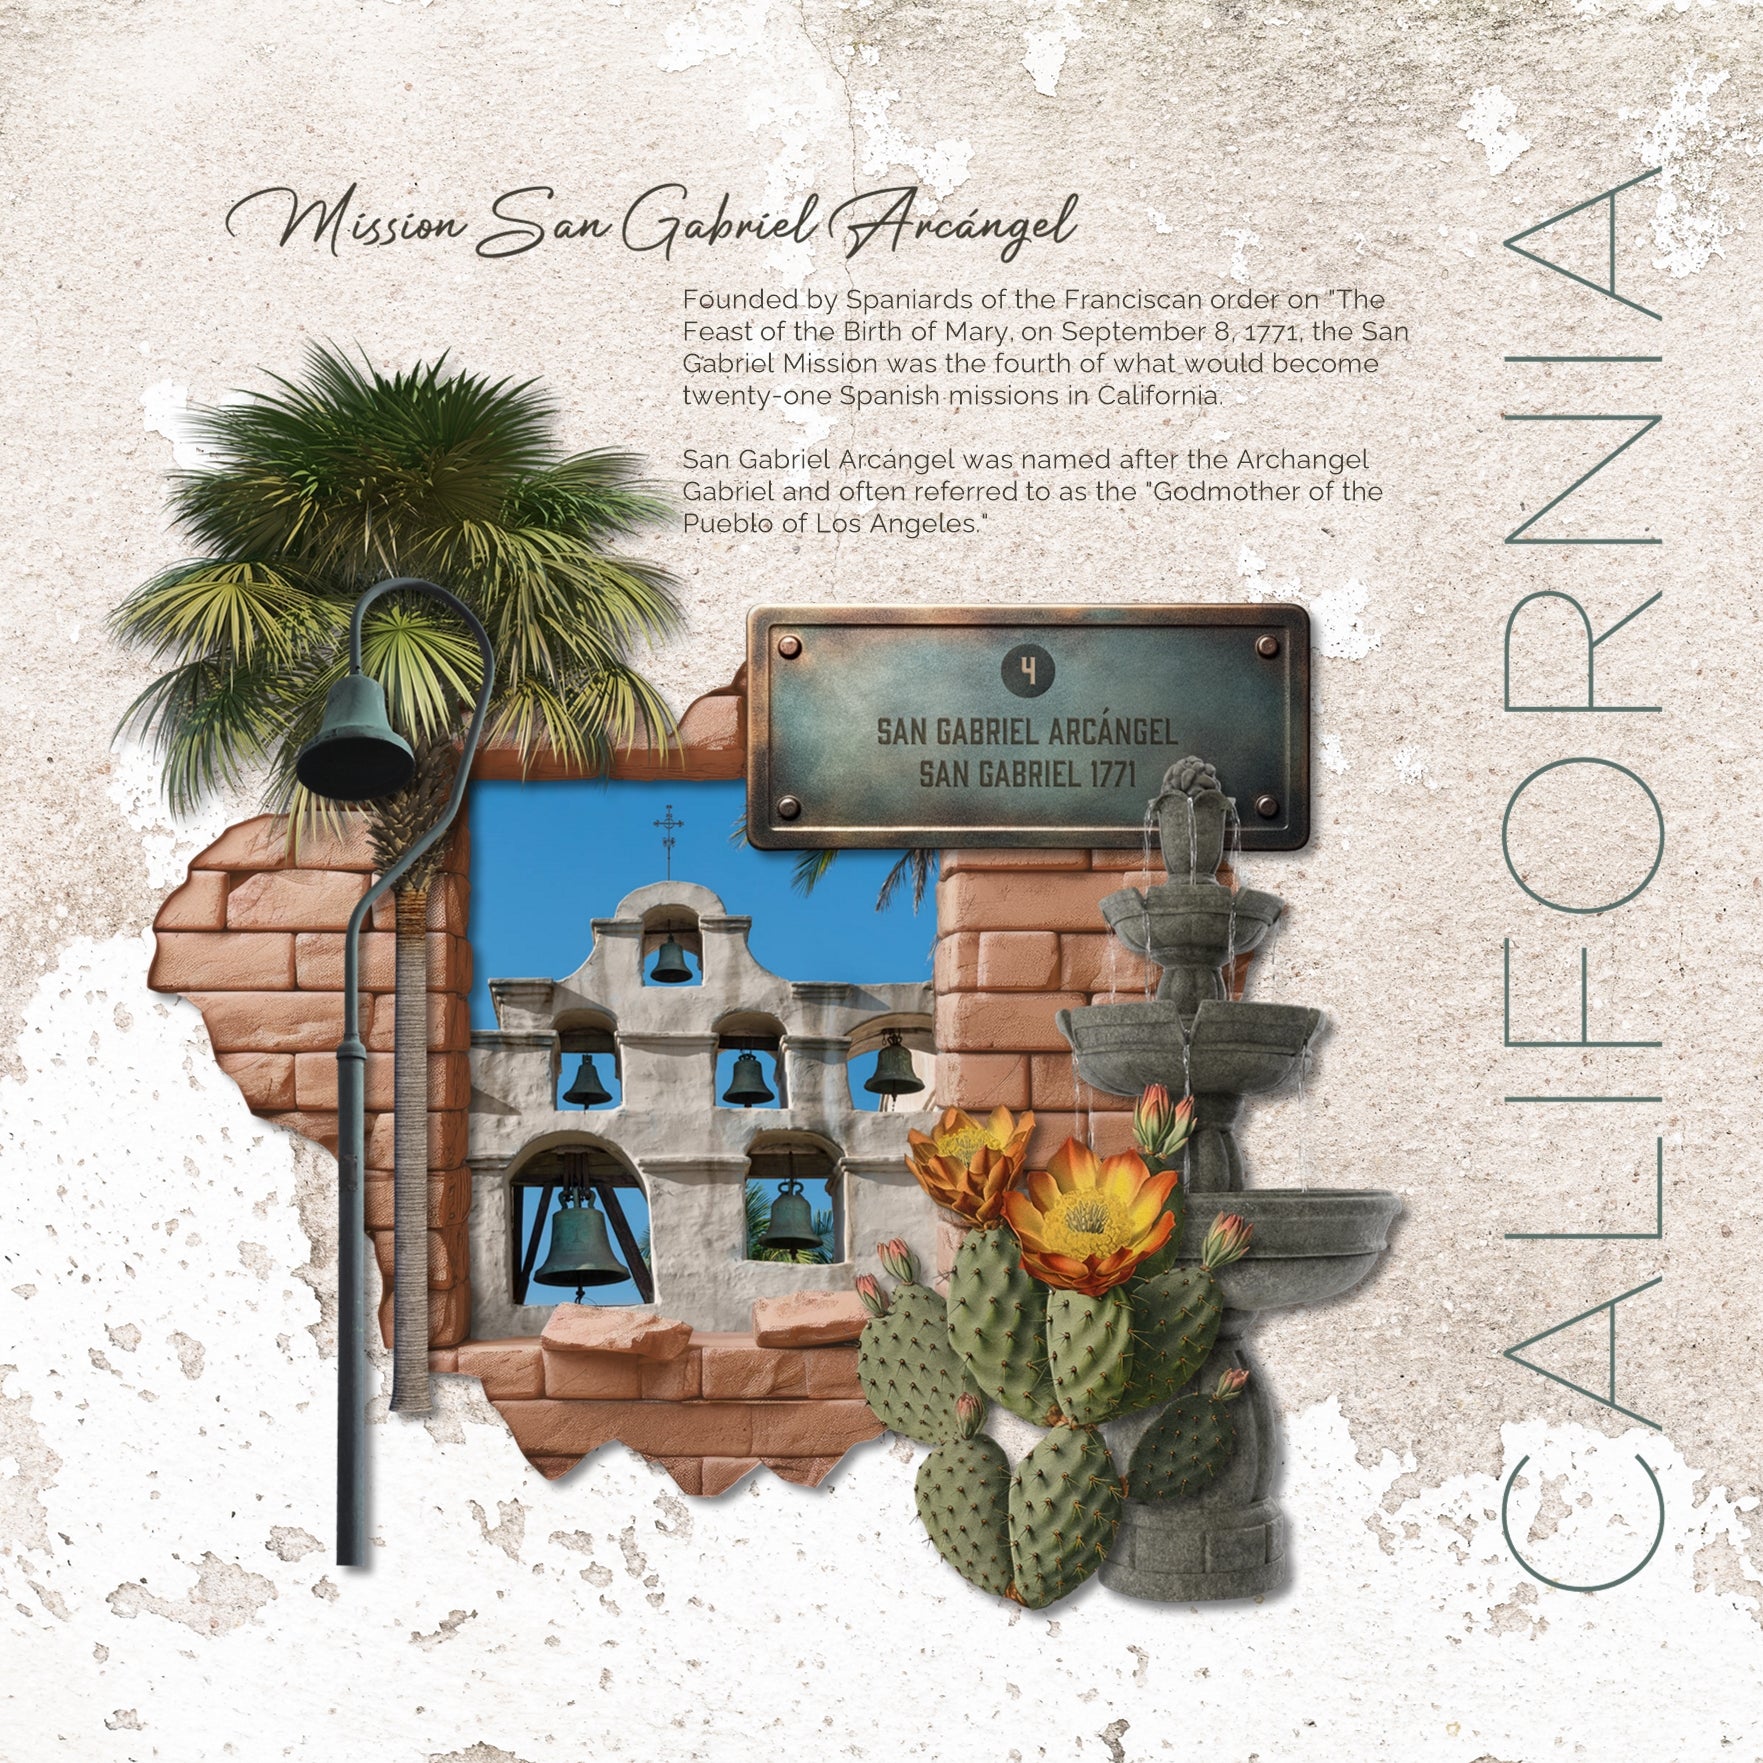 Explore the 21 California Missions along the Historic Mission Trail that roughly follows the El Camino Real (The Royal Road) named in honor of the Spanish monarchy which financed the expeditions into California in the quest for empire. The digital art background papers by Lucky Girl Creative showcase the stone, rock, plaster, and brick walls of the missions. Largely reconstructed after the ravages of time, weather, earthquakes and neglect, most of the missions still operate as active Catholic parishes.